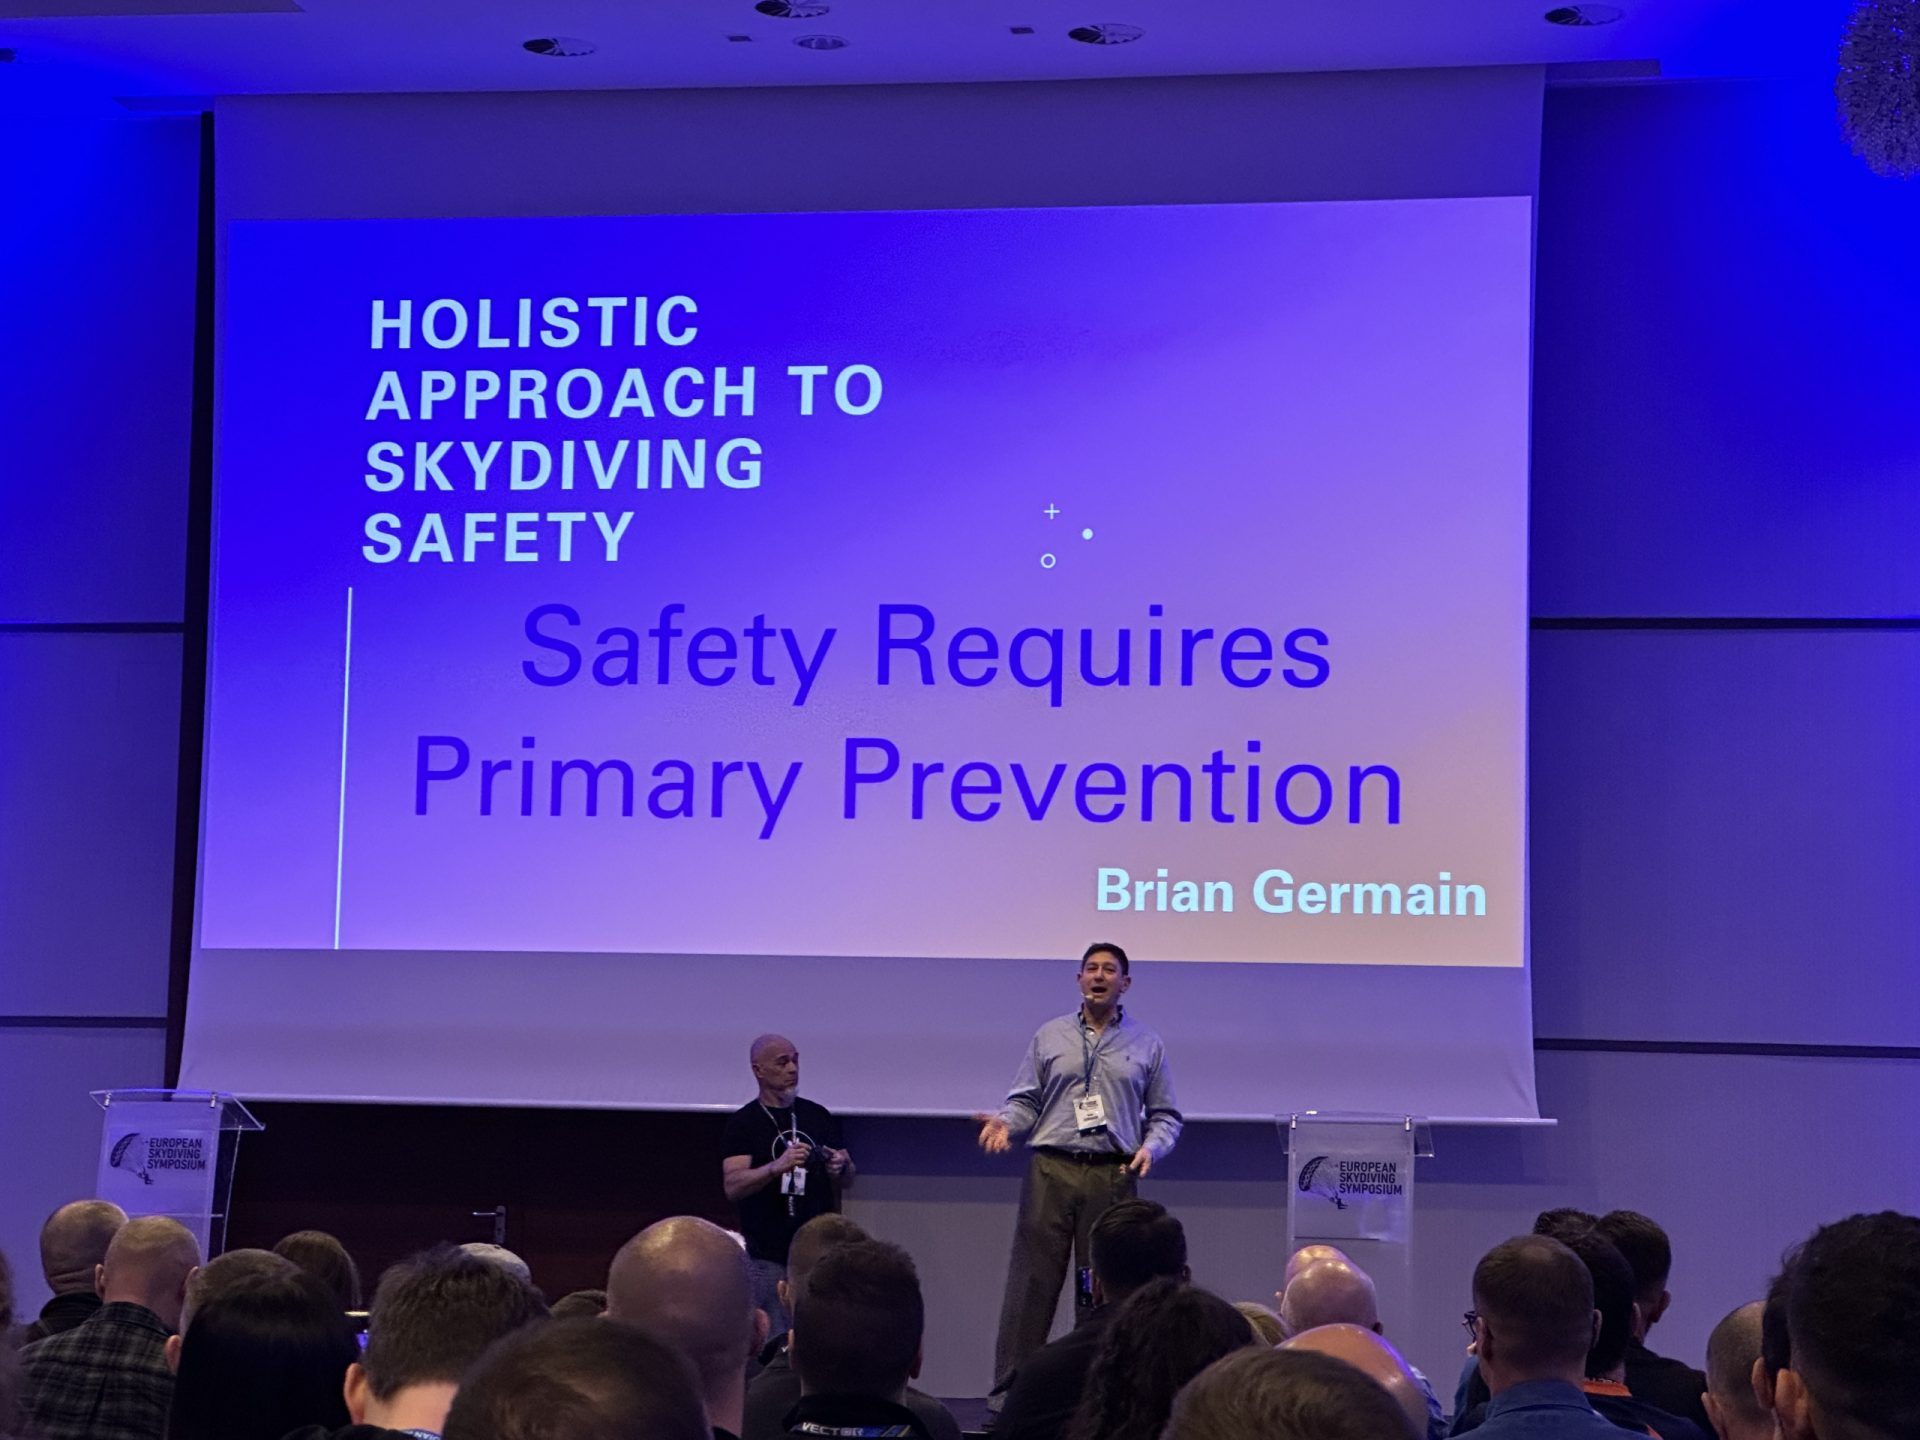 Brian Germain talking about Skydiving Safety